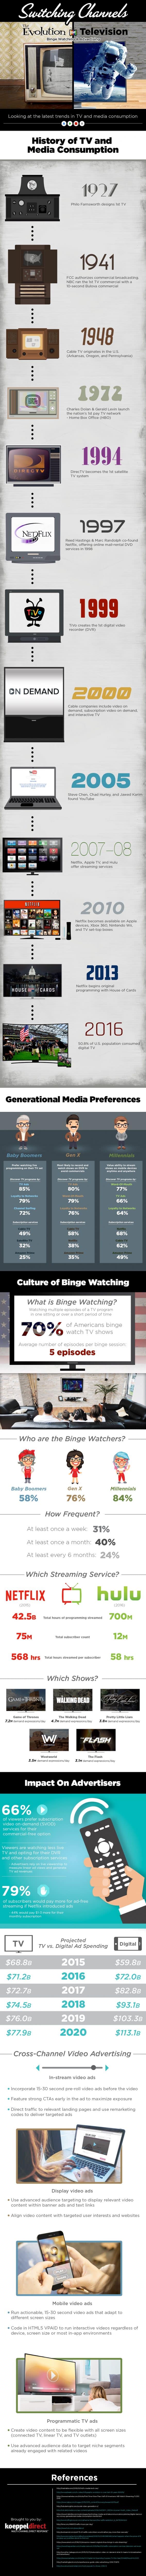 The Evolution Of Television and Binge-Watching